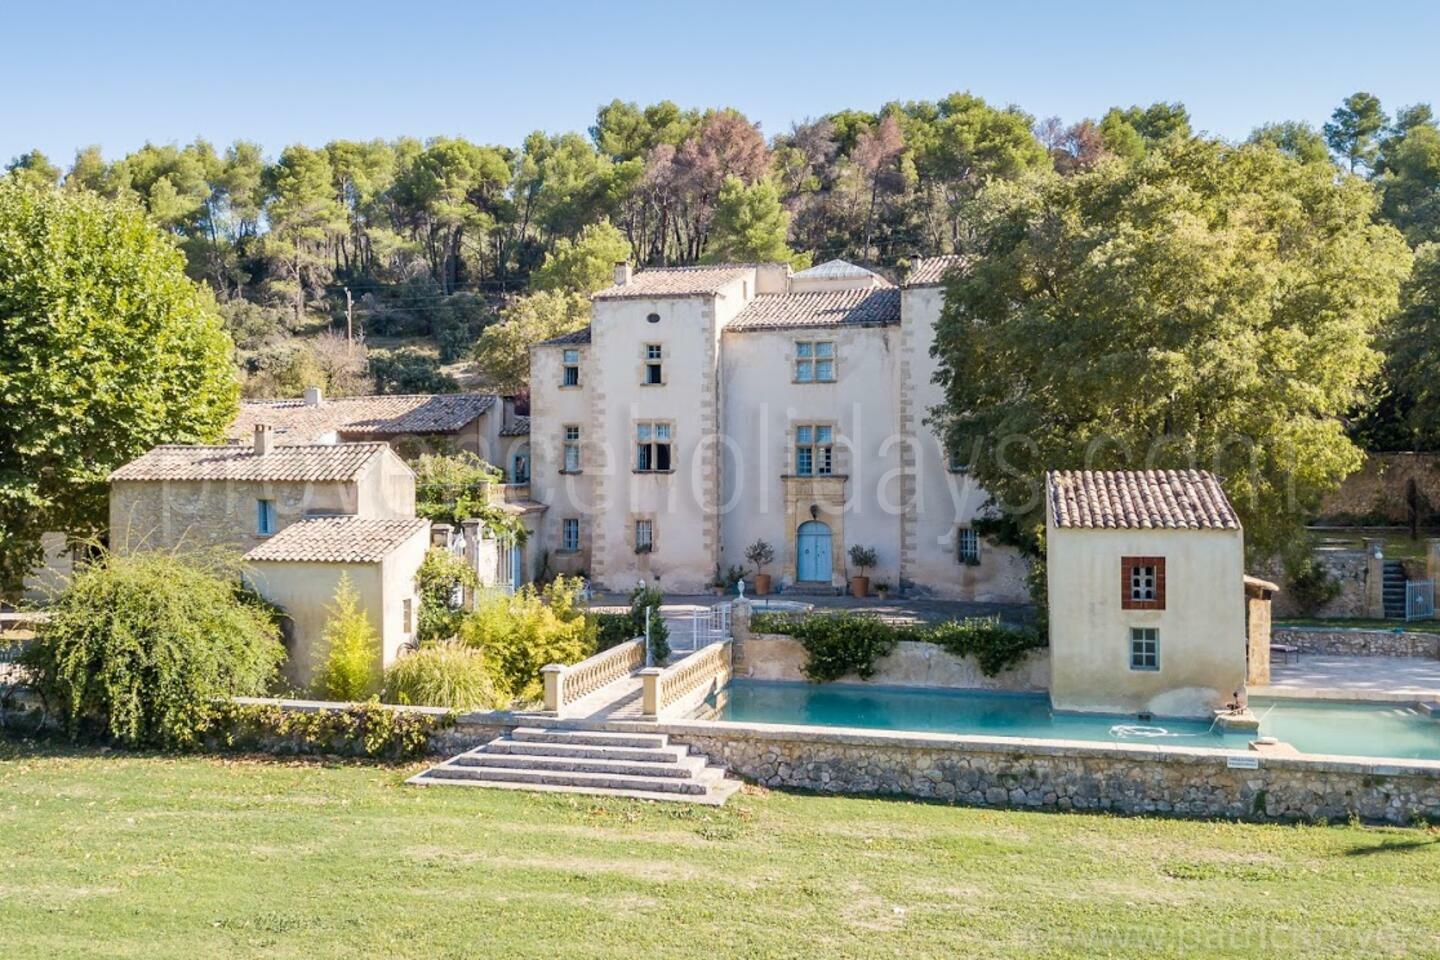 16th Century Mansion For Sale in the Luberon Bastide du Luberon: Exterior - 1